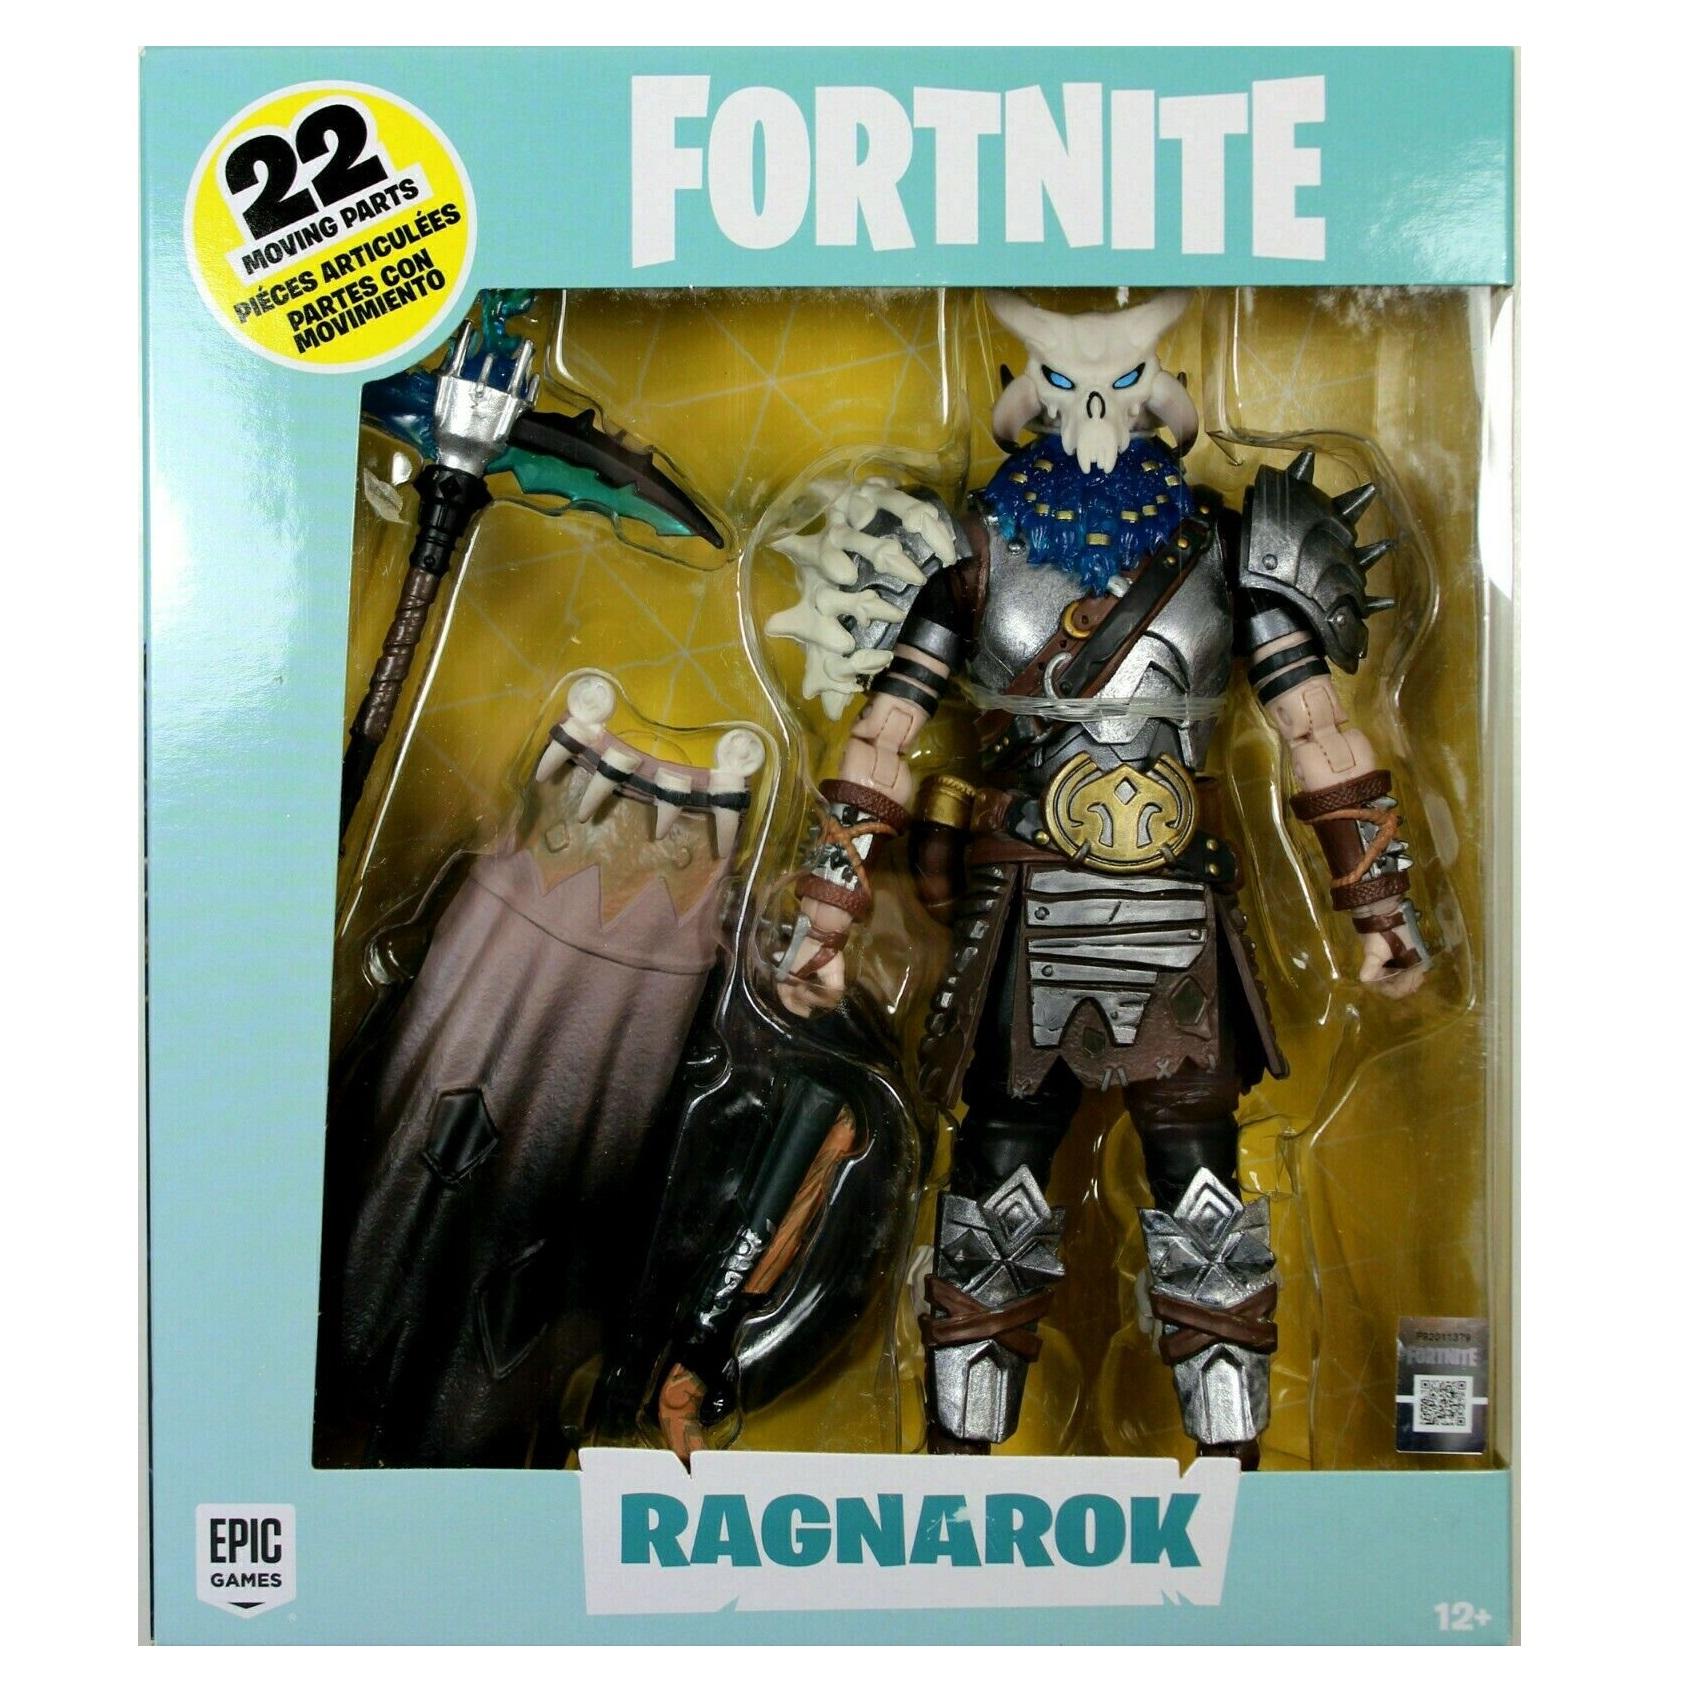 Fortnite 22 Moving Parts The Prisioner Action Figure McFarlane Toys!!!!